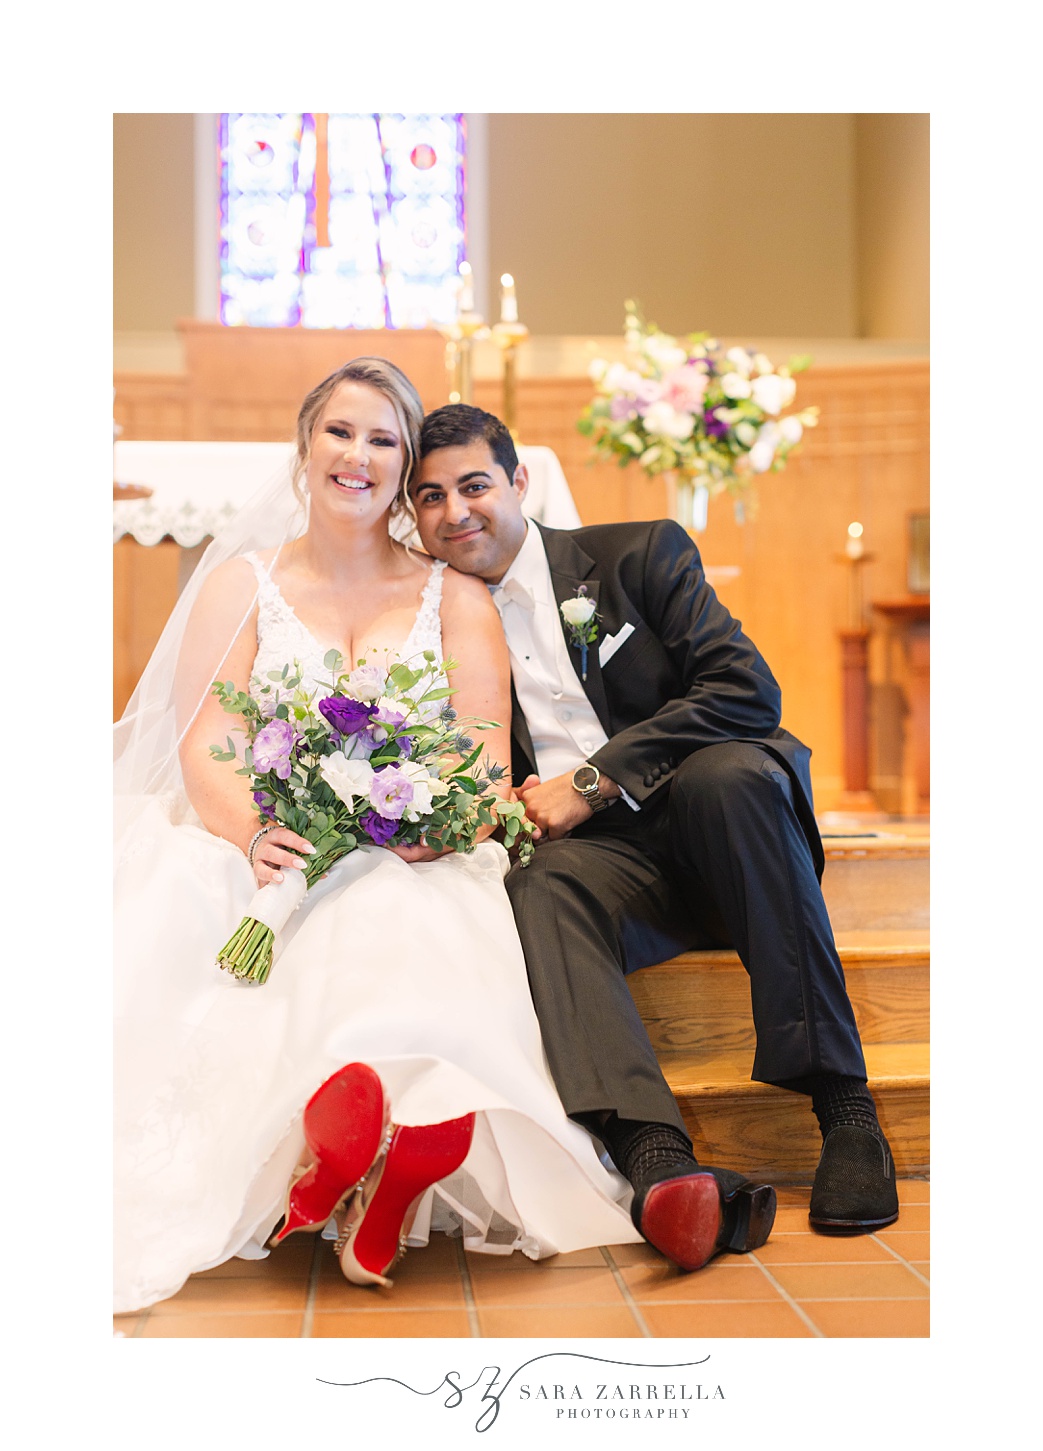 bride and groom sit together in church after traditional wedding ceremony in Rhode Island church